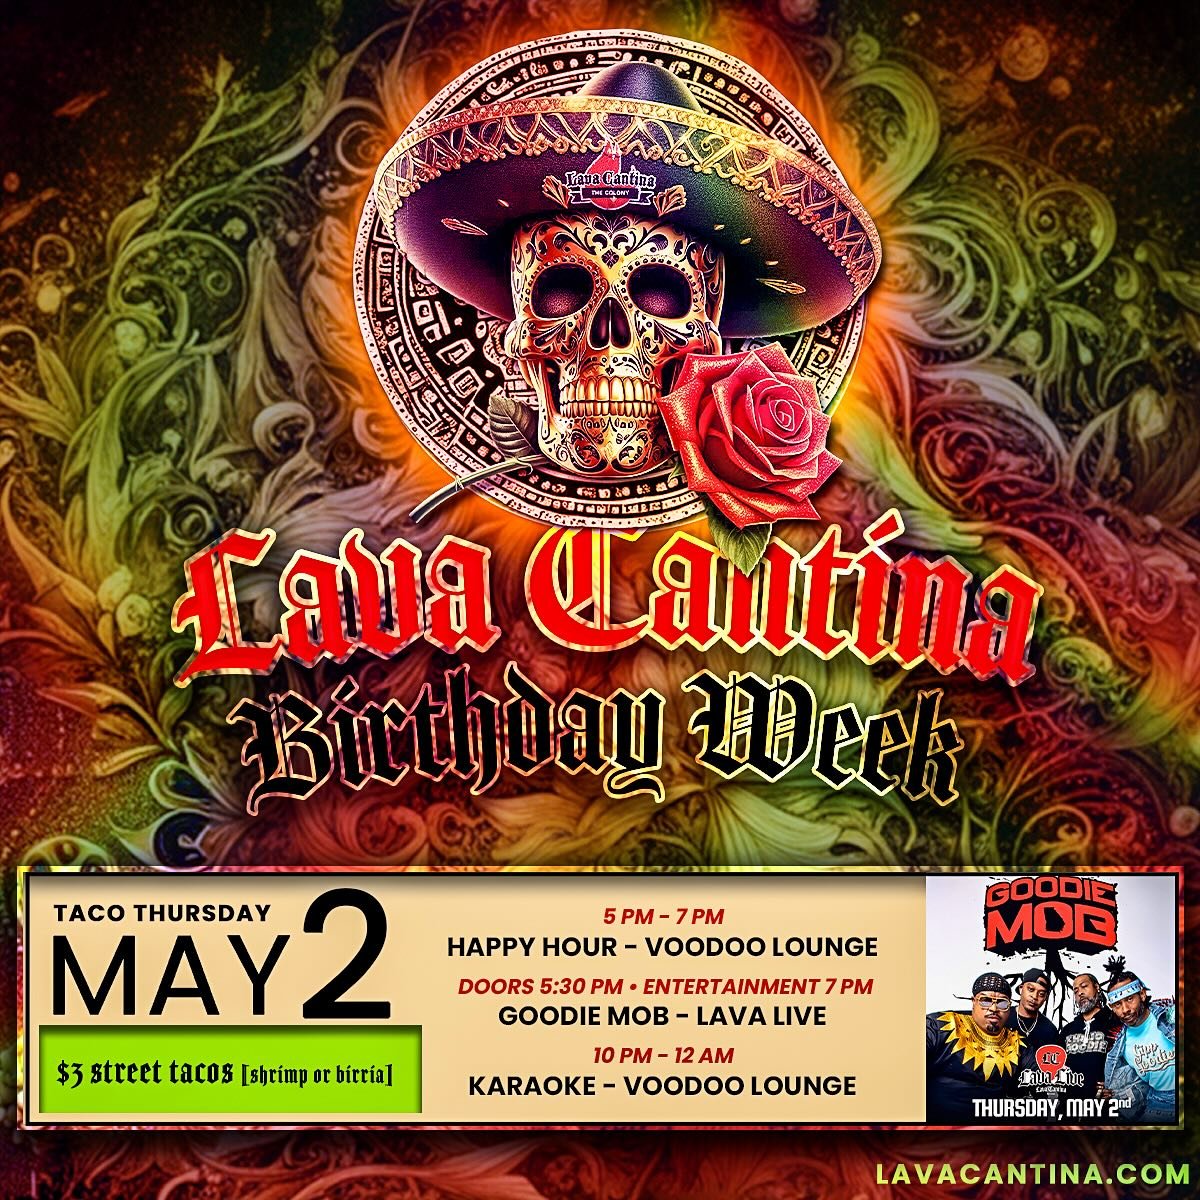 🚨 BIRTHDAY WEEK @lavacantinac 🚨

🎉🥳🔥🎉🥳🔥 - GET YOUR TIX NOW!
🎟️🎟️➡️ LavaCantina.com

TACO THURSDAY - May 2nd
🪇$3 Street Tacos🪇
Happy Hour 5 PM - 7 PM
GOODIE MOBB 
🔥Lava Live at Lava Cantina
Doors  5:30 PM | Entertainment 7 PM
AGES: All Ag